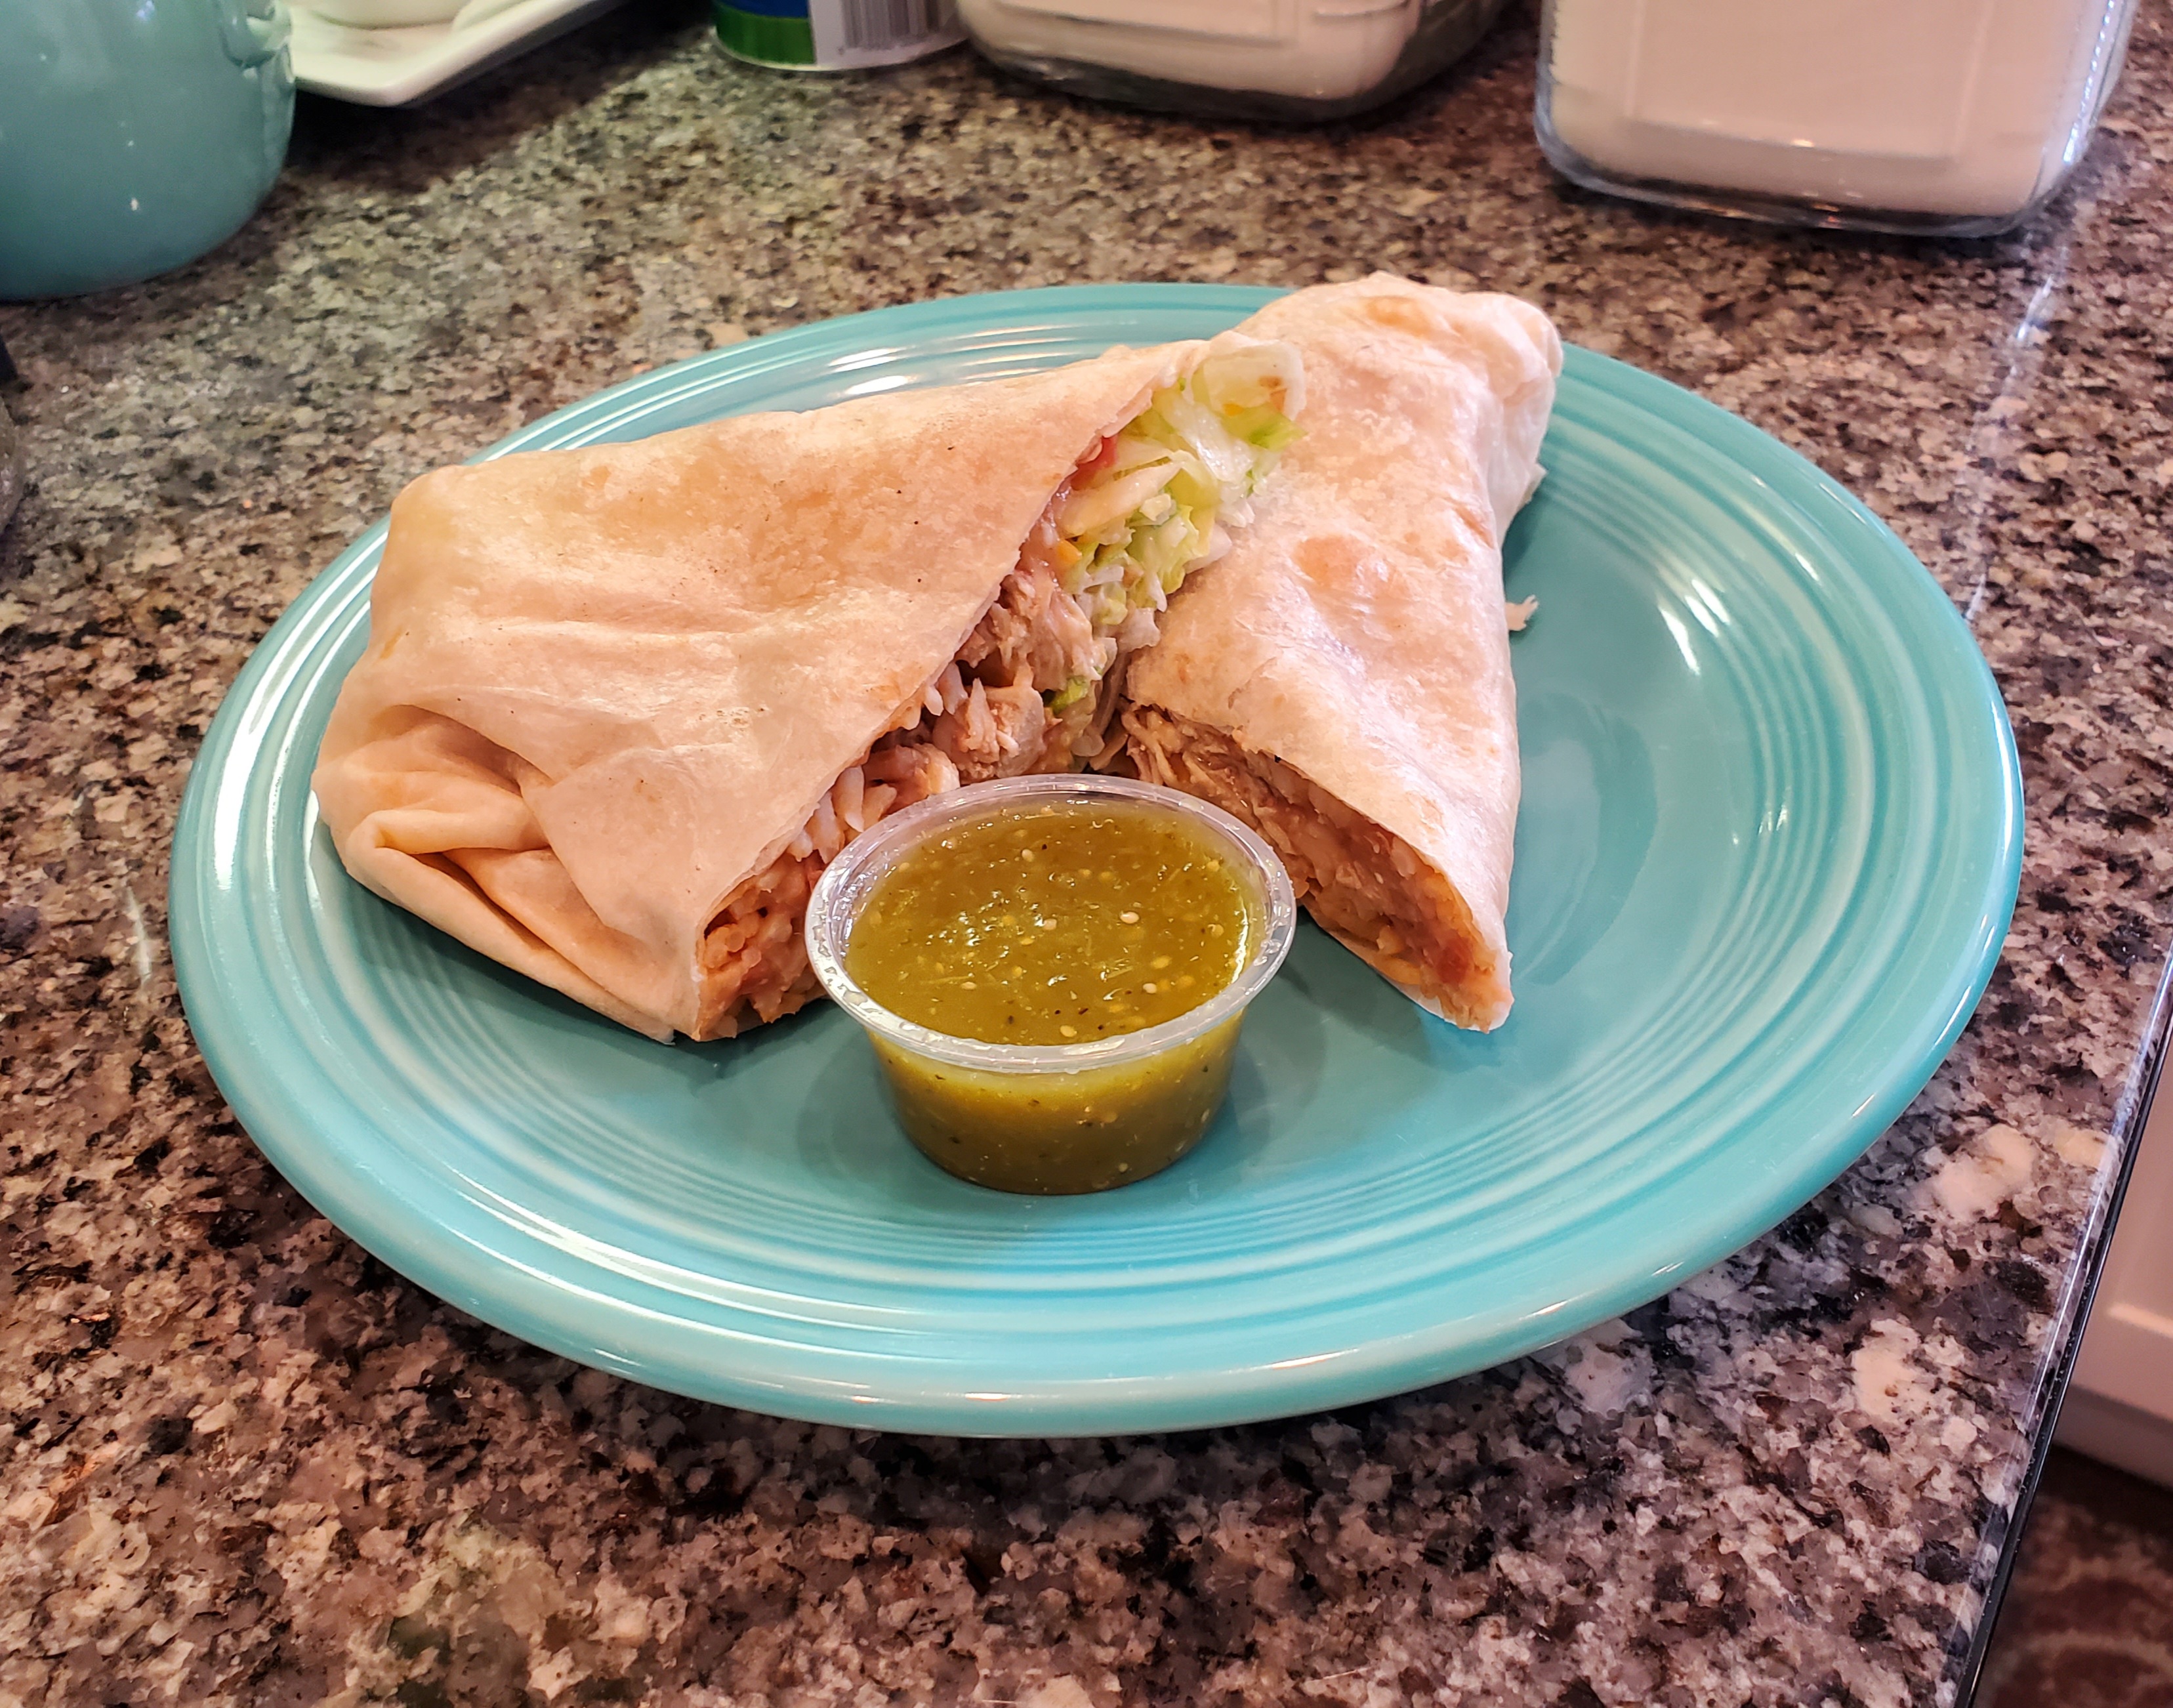 On a light blue plate, there is a chicken burrito cut in half with a small cup of verde salsa in front. Photo by Carl Busch.